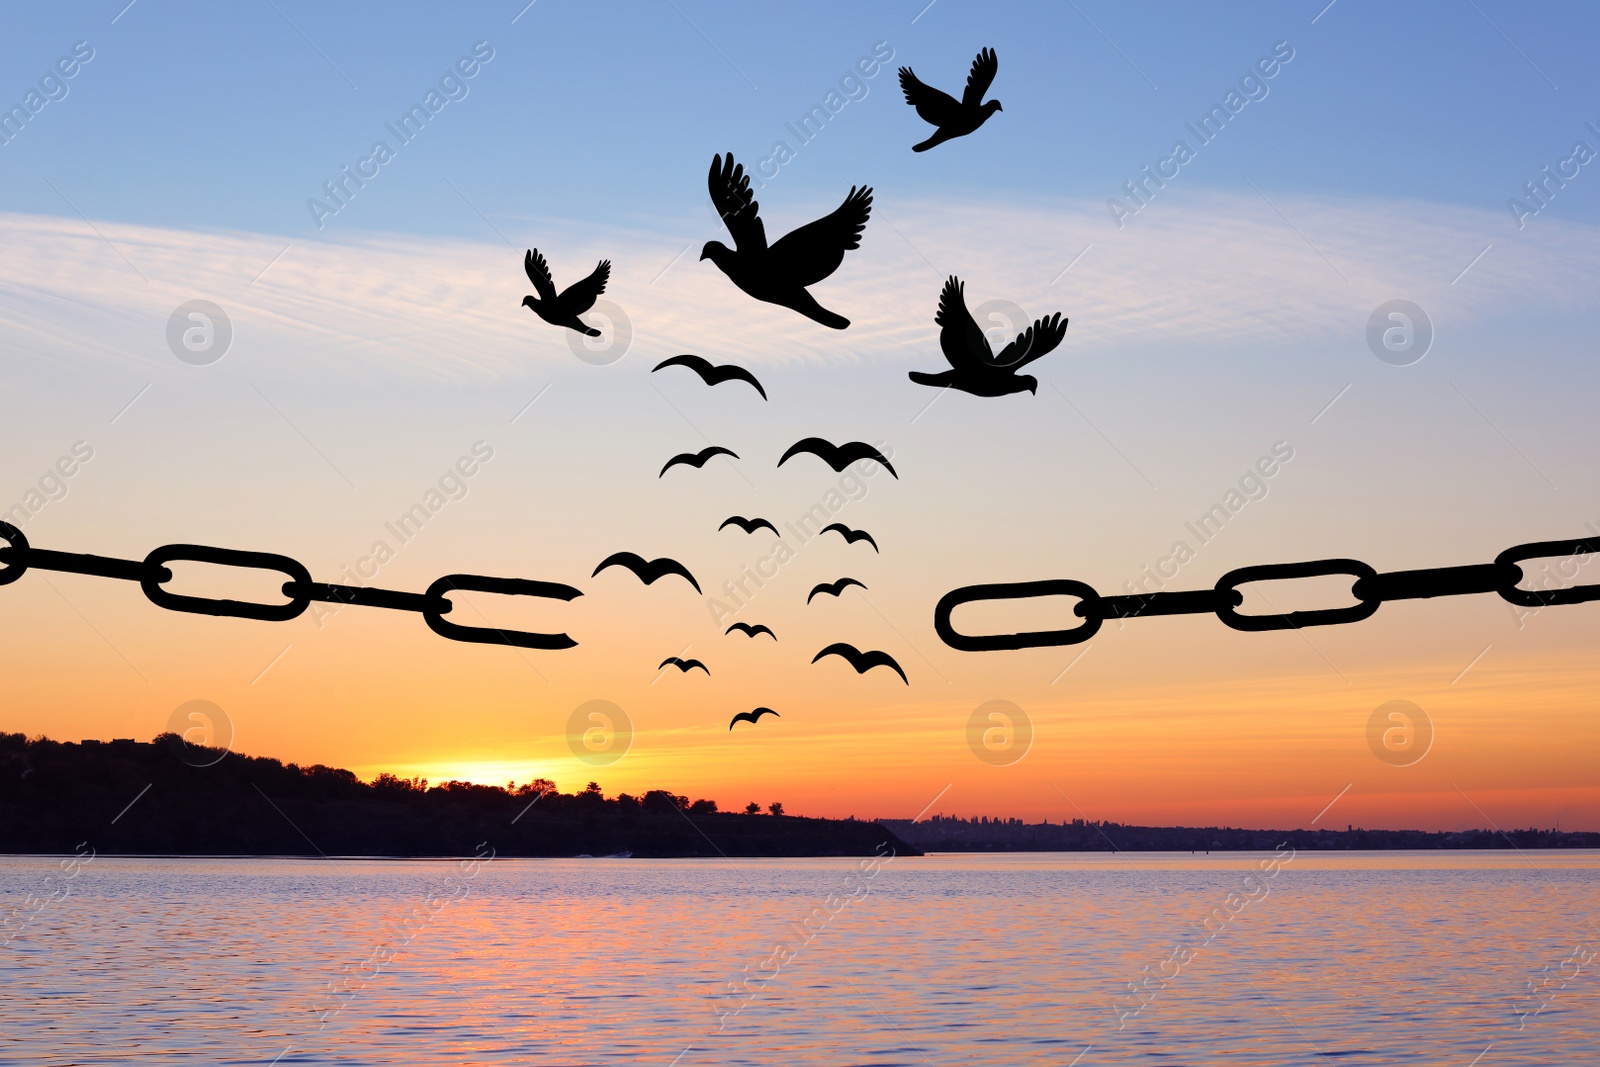 Image of Freedom concept. Silhouettes of broken chain and birds flying over river at sunset